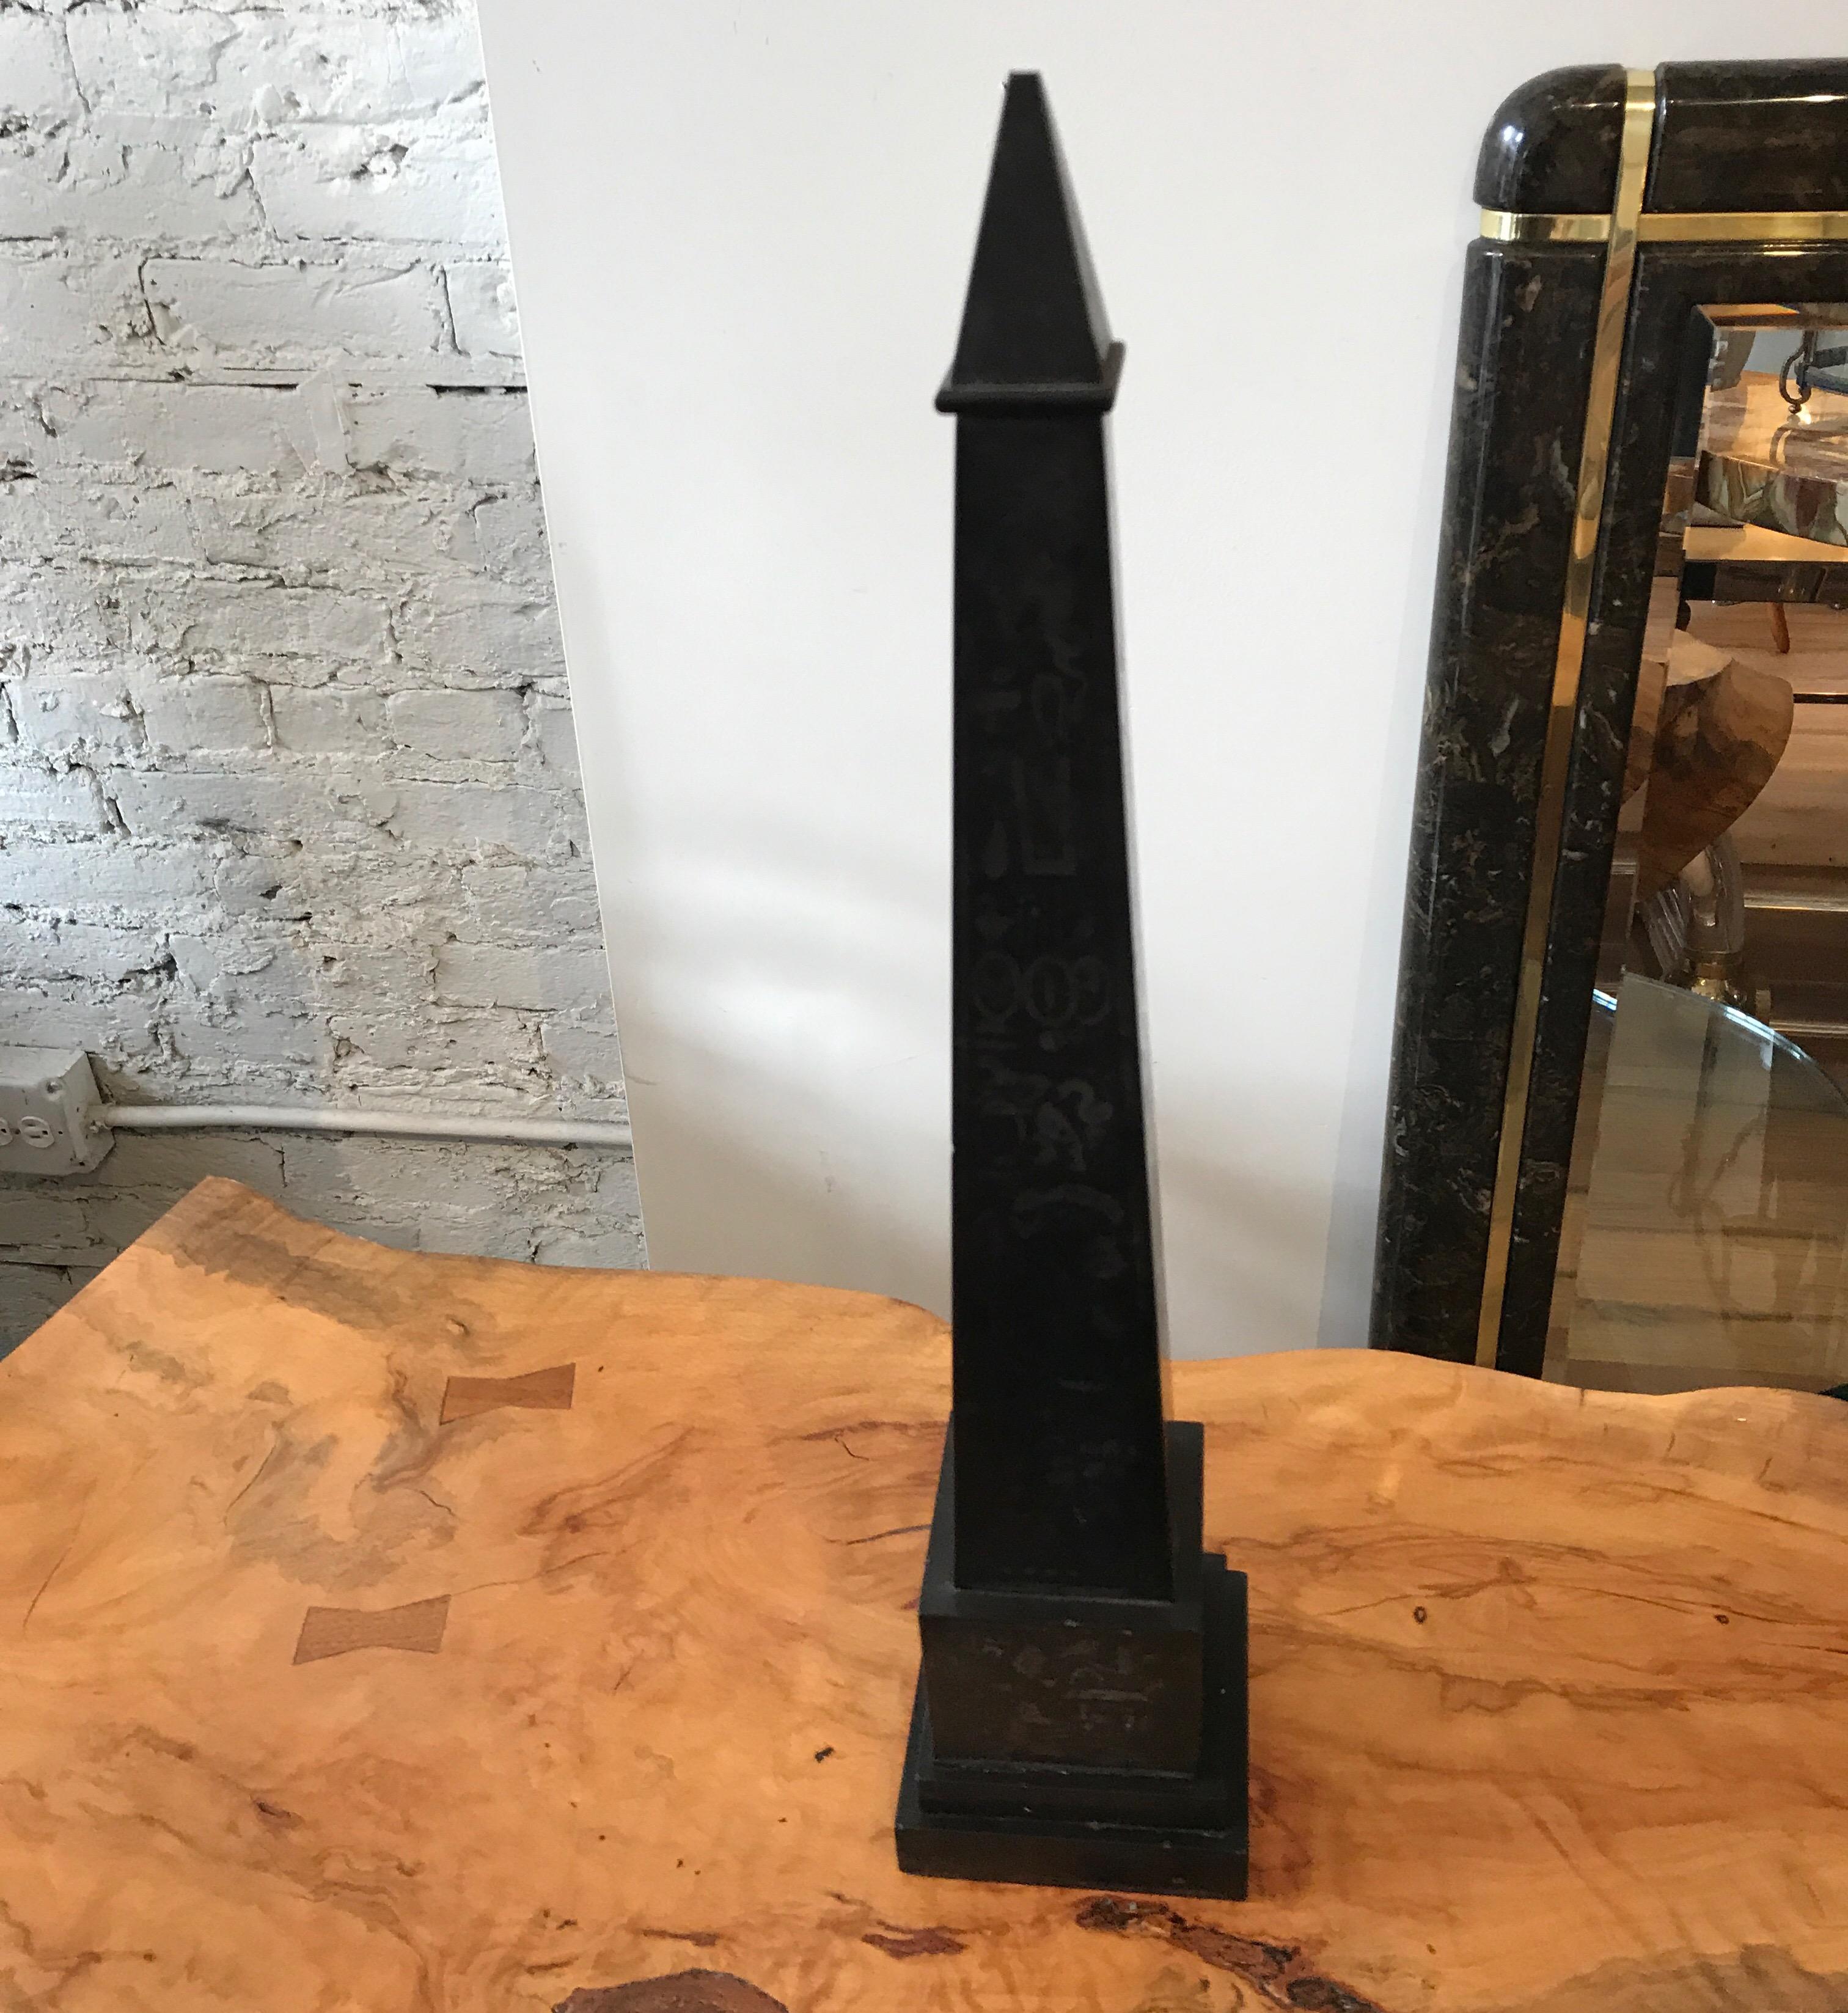 Large Italian Nero Antico marble Grand Tour obelisk.
This 19th century Egyptian revival obelisk features acid etched hieroglyphs
on its base and sides. Beautiful decorative object.